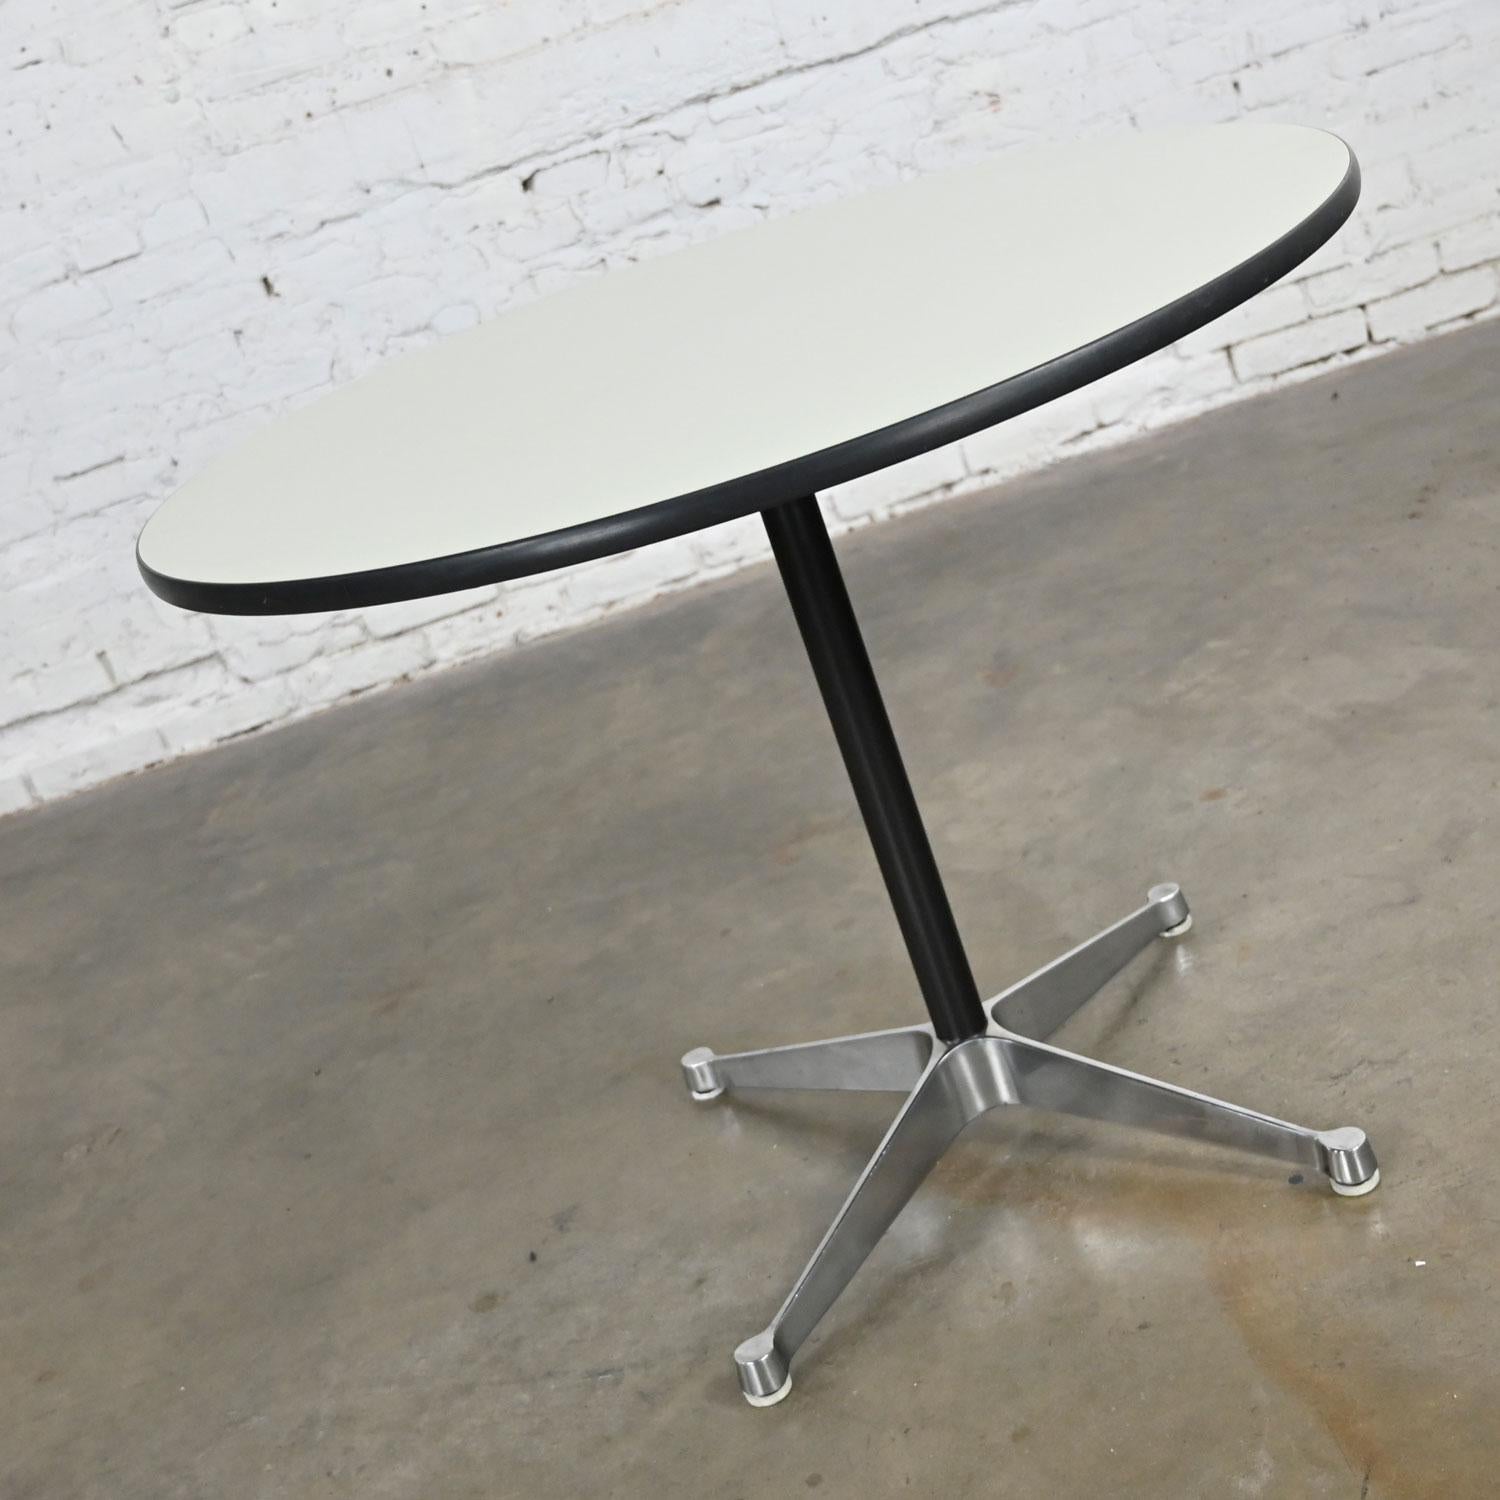 Vintage Eames Herman Miller MCM Aluminum Group 4 Prong Contract Base White Laminate Top Table

Handsome vintage Eames for Herman Miller mid-century modern Aluminum Group 4 prong chrome Contract base table with black shaft and white laminate tops